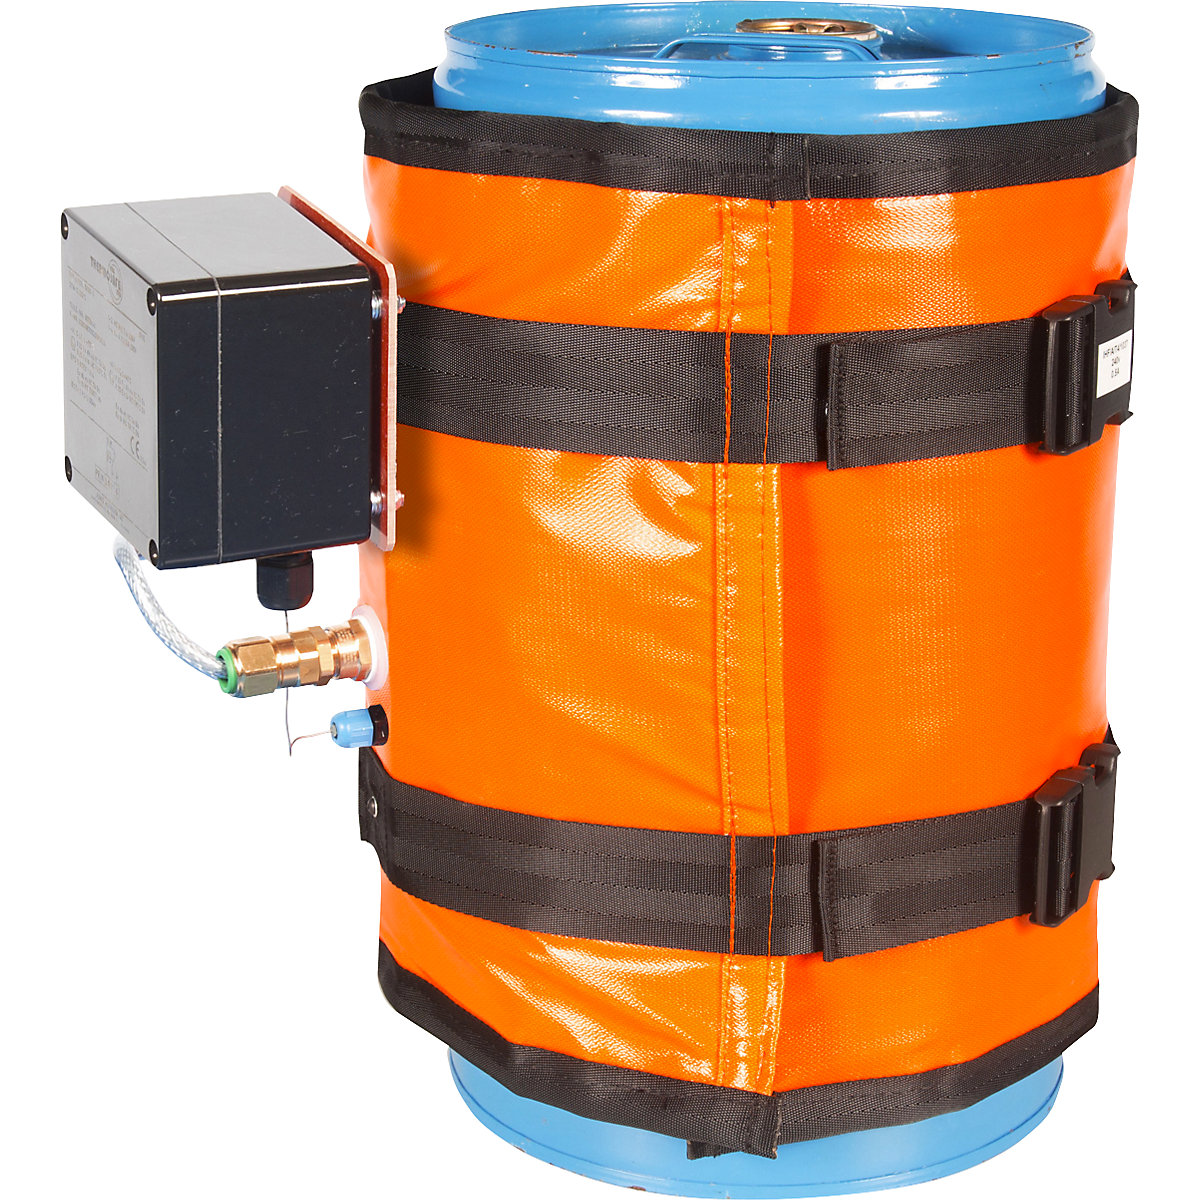 ECO ATEX canister/drum heating jacket